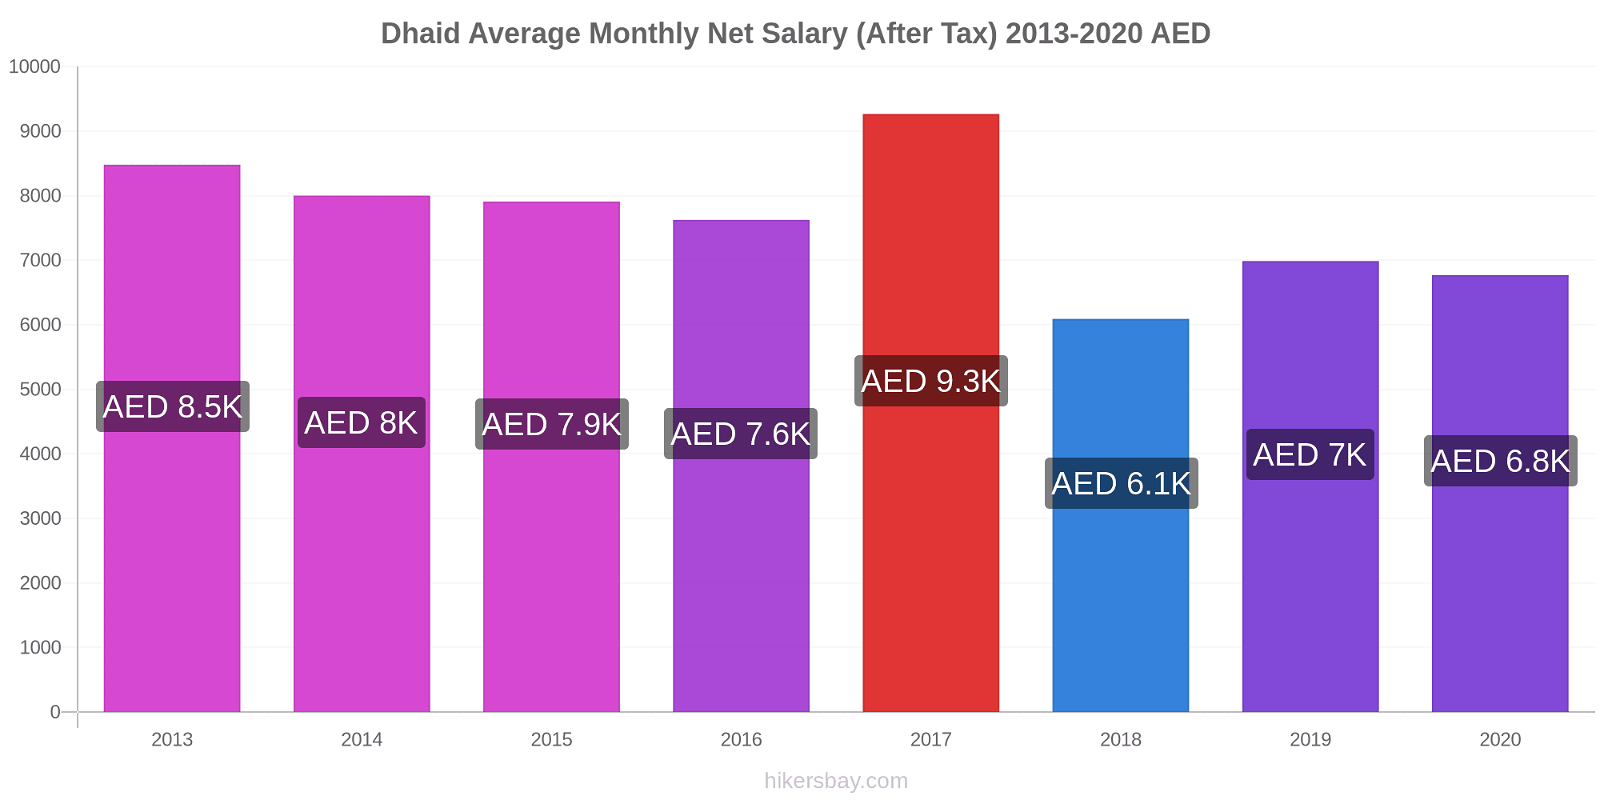 Dhaid price changes Average Monthly Net Salary (After Tax) hikersbay.com